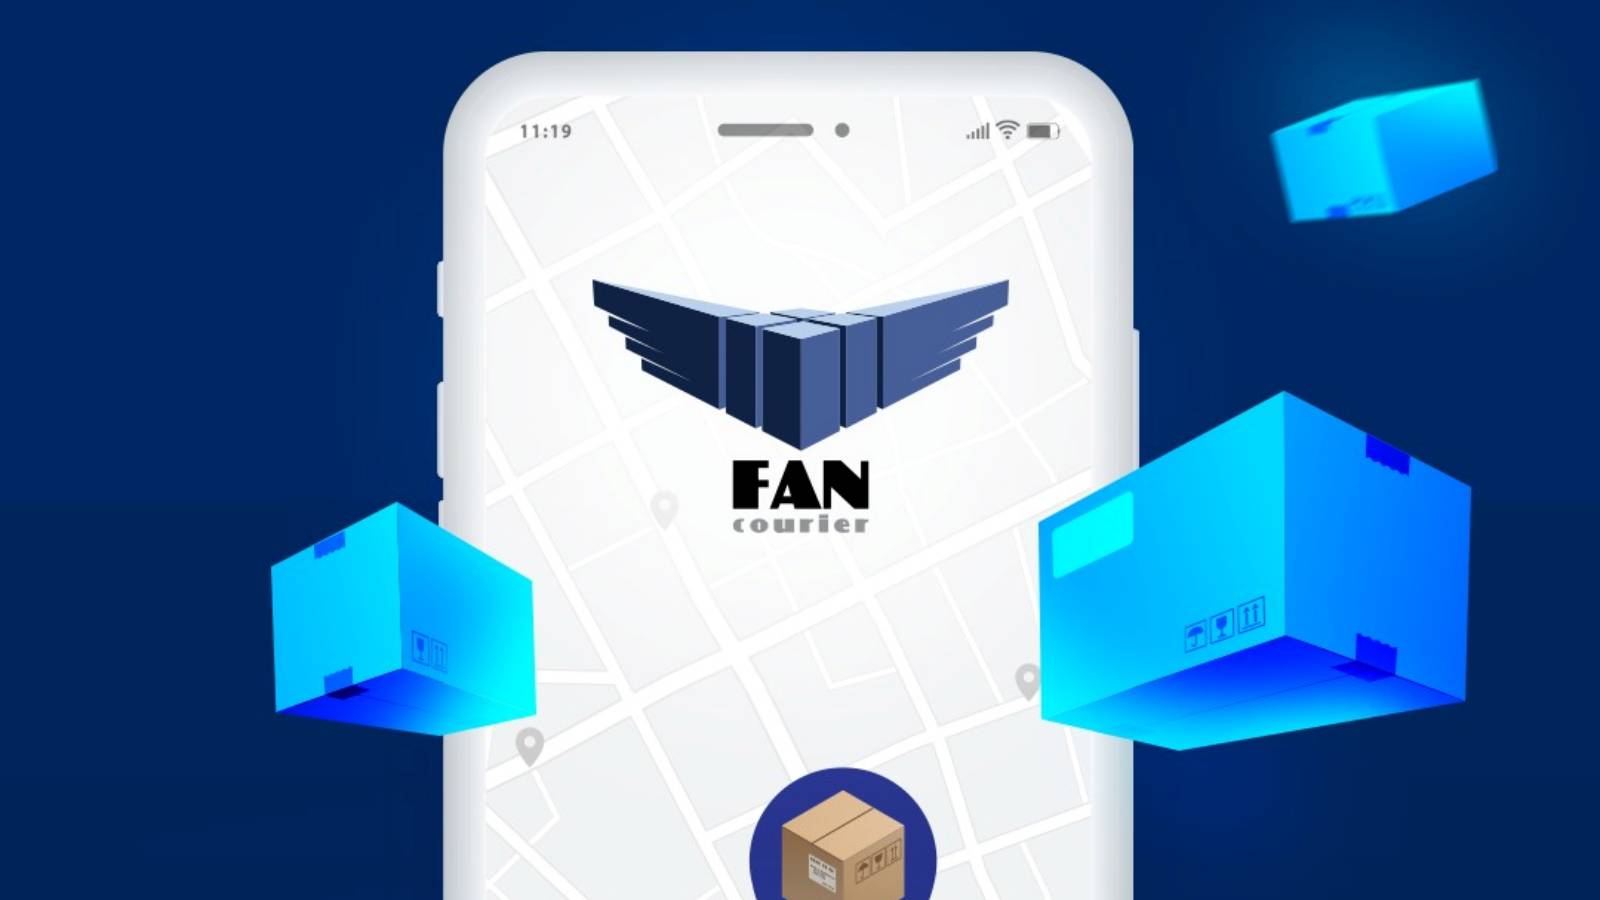 FAN Courier LAST MOMENT Official Information Targets Millions of Romanians